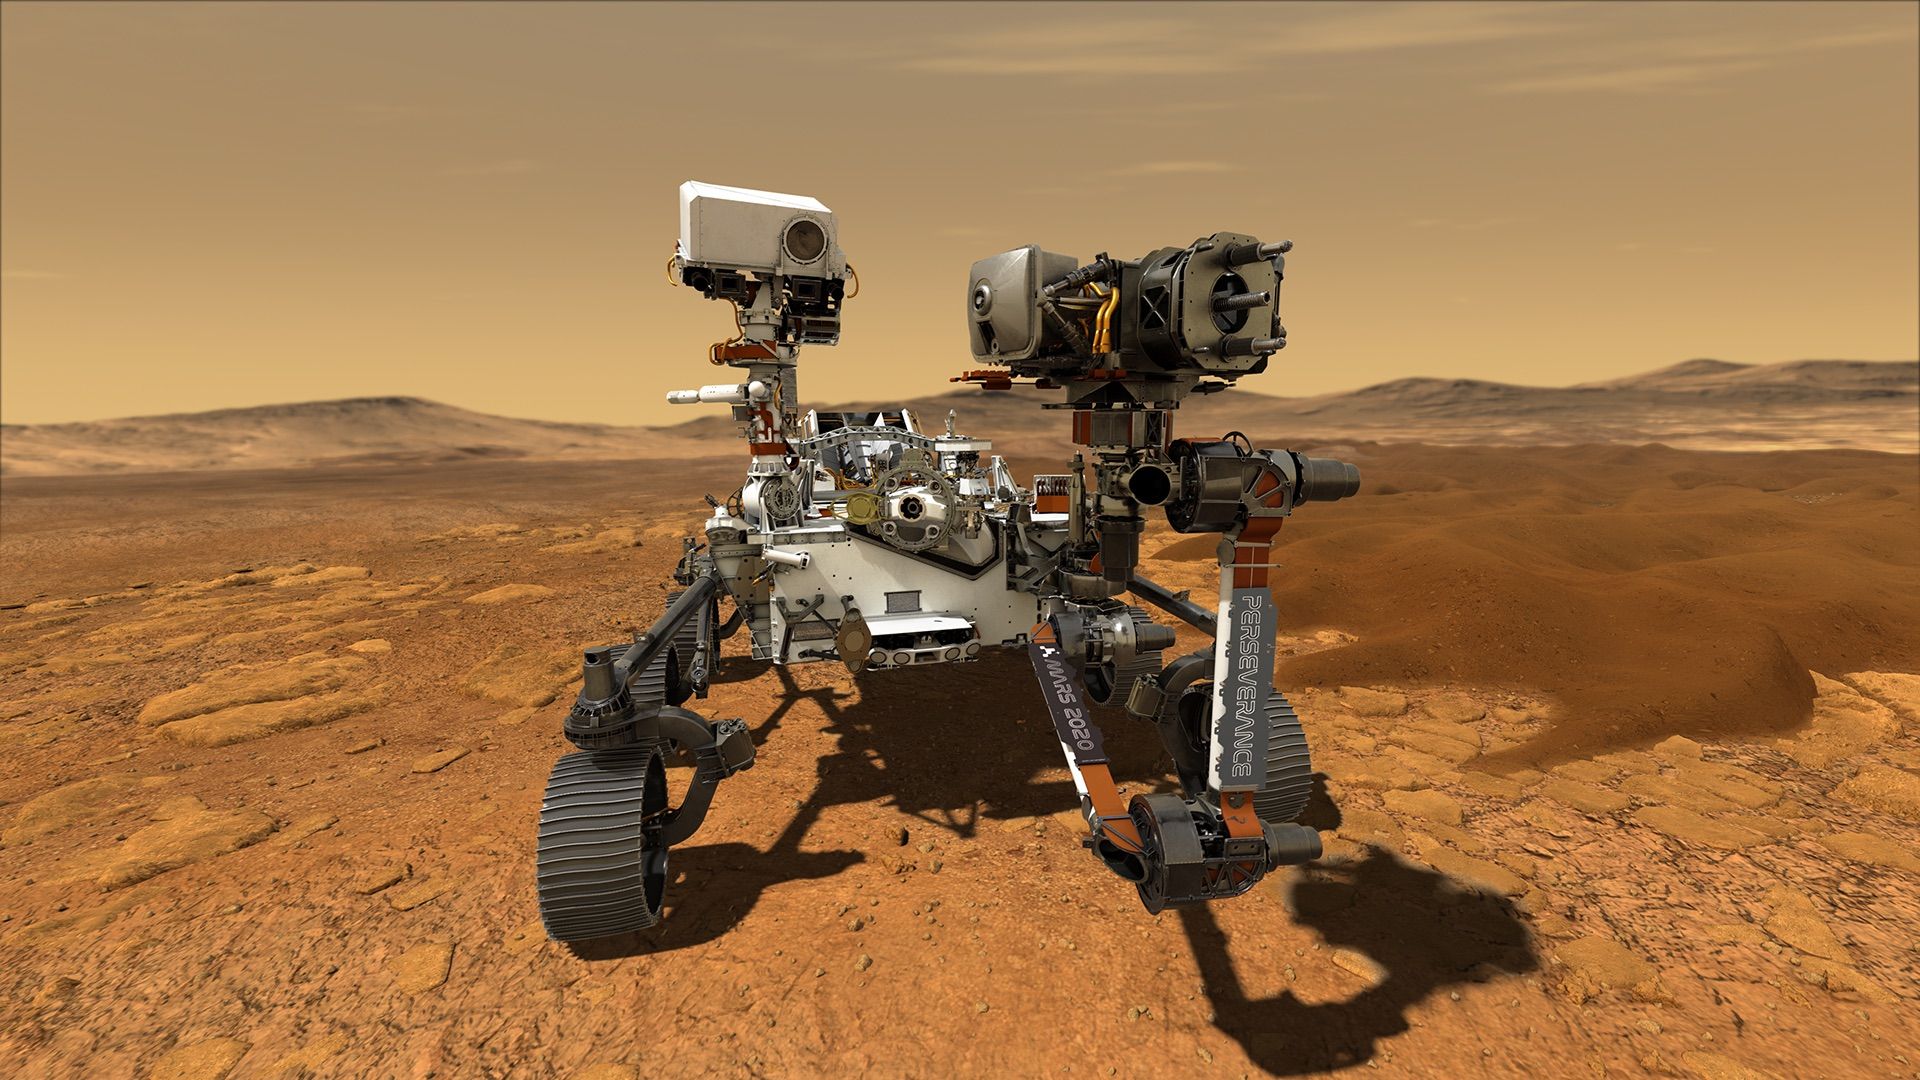 Artist's illustration of the Perseverance rover on Mars